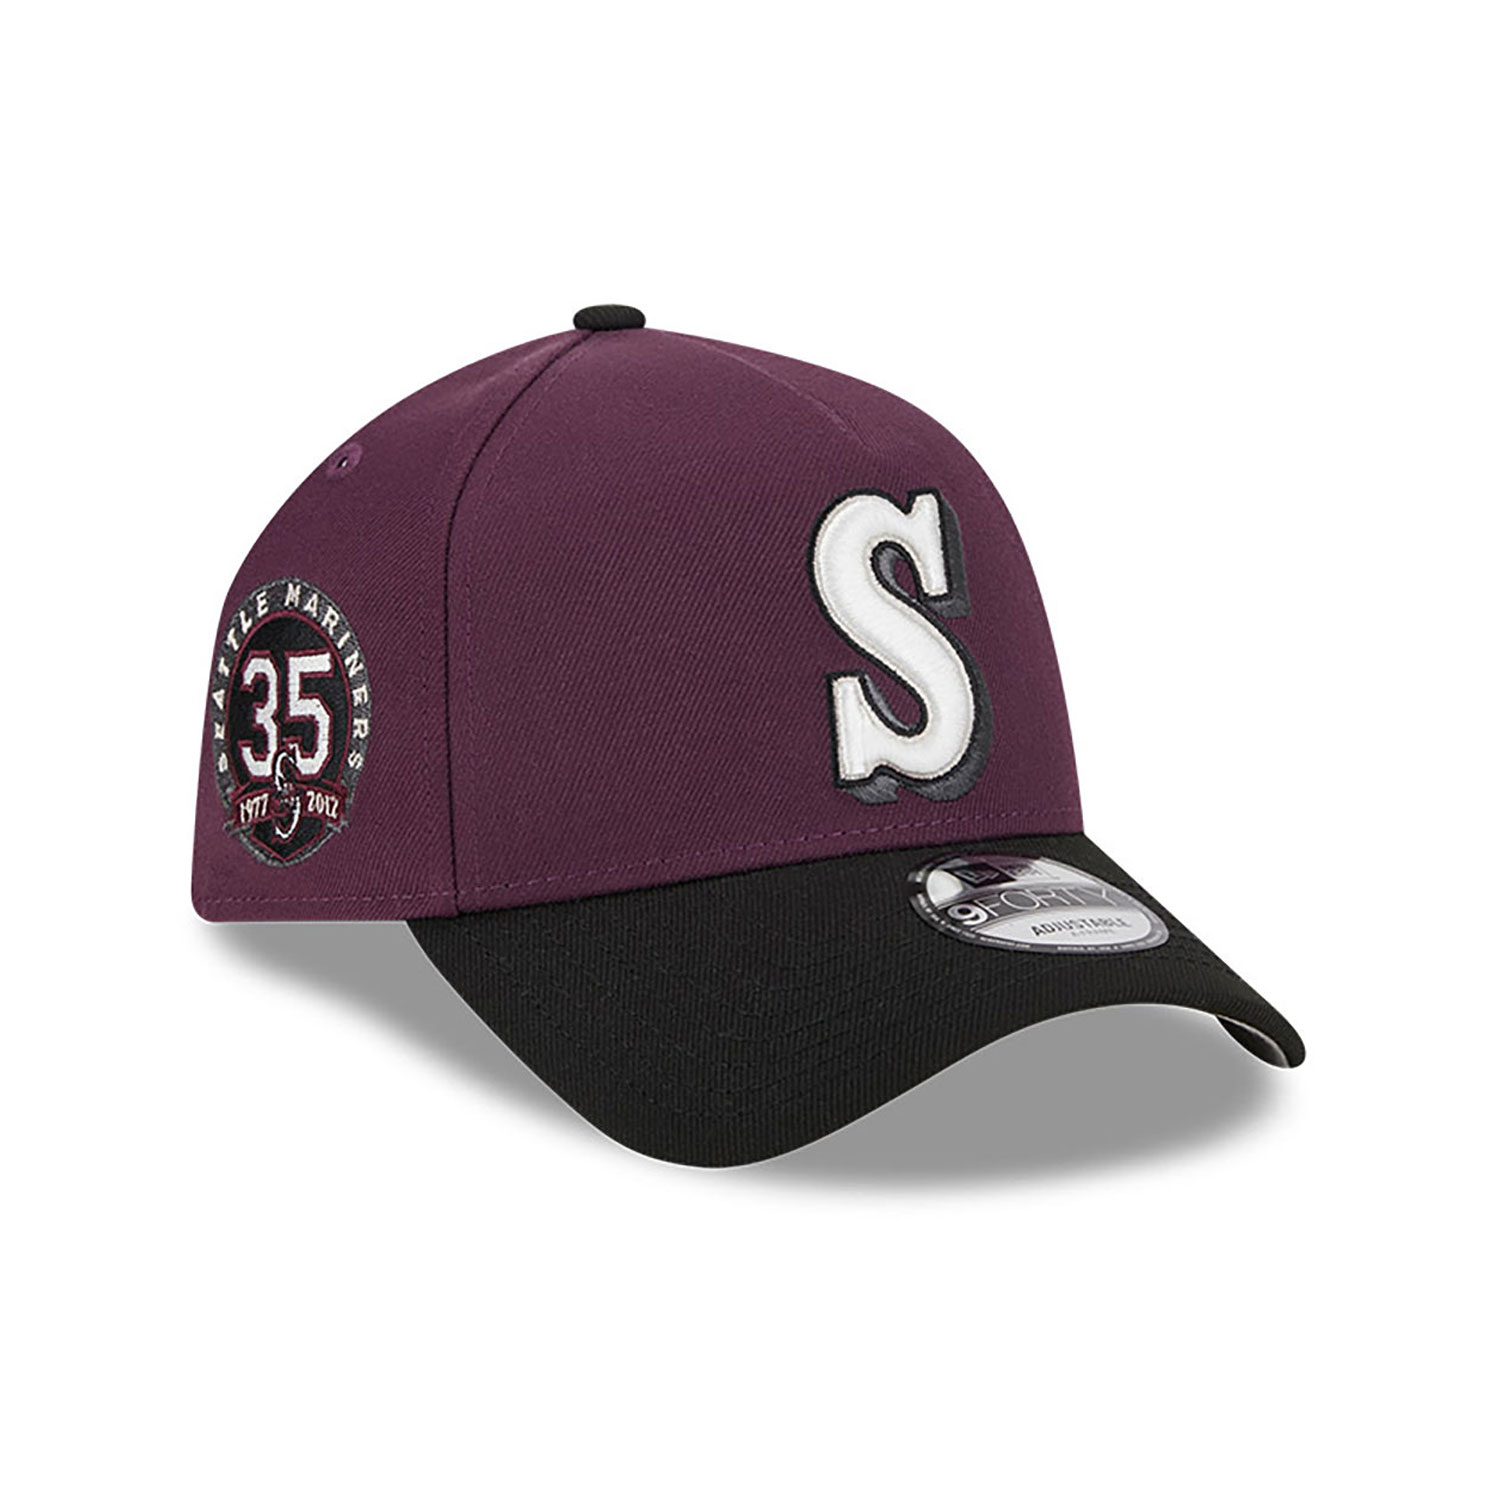 Seattle Mariners Two-Tone Dark Purple 9FORTY A-Frame Adjustable Cap